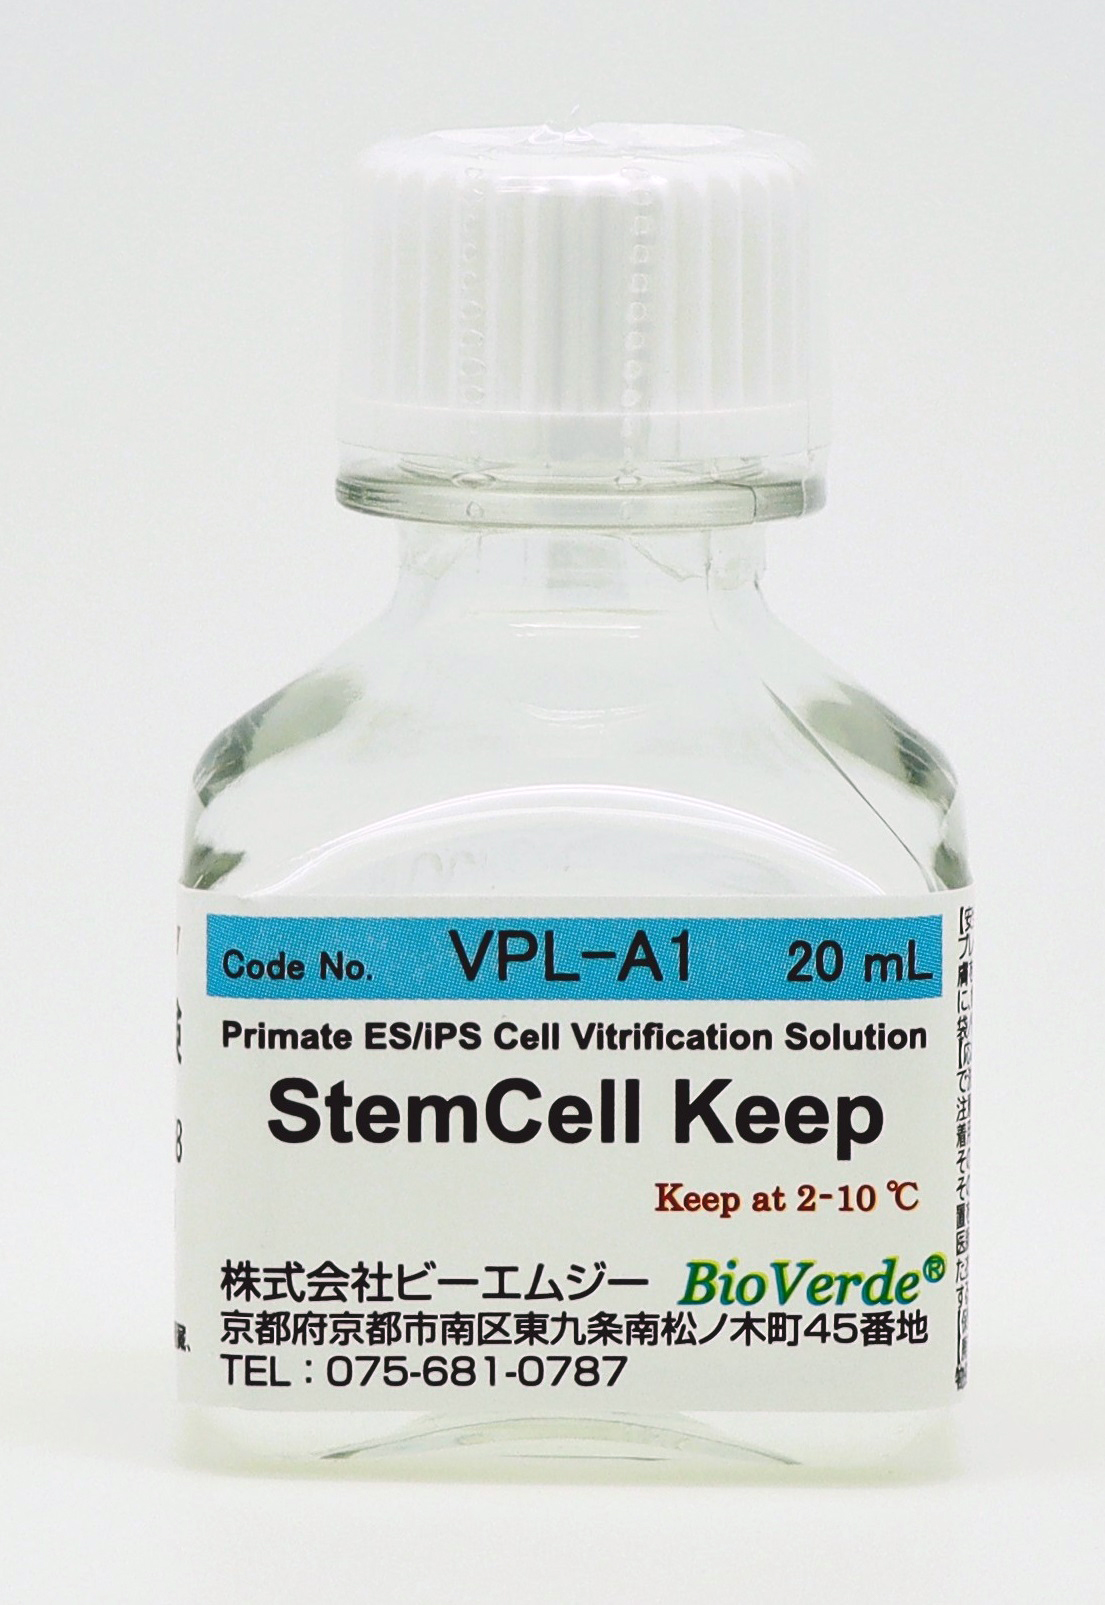 Cryopreserving medium without DMSO and Serum : StemCell Keep